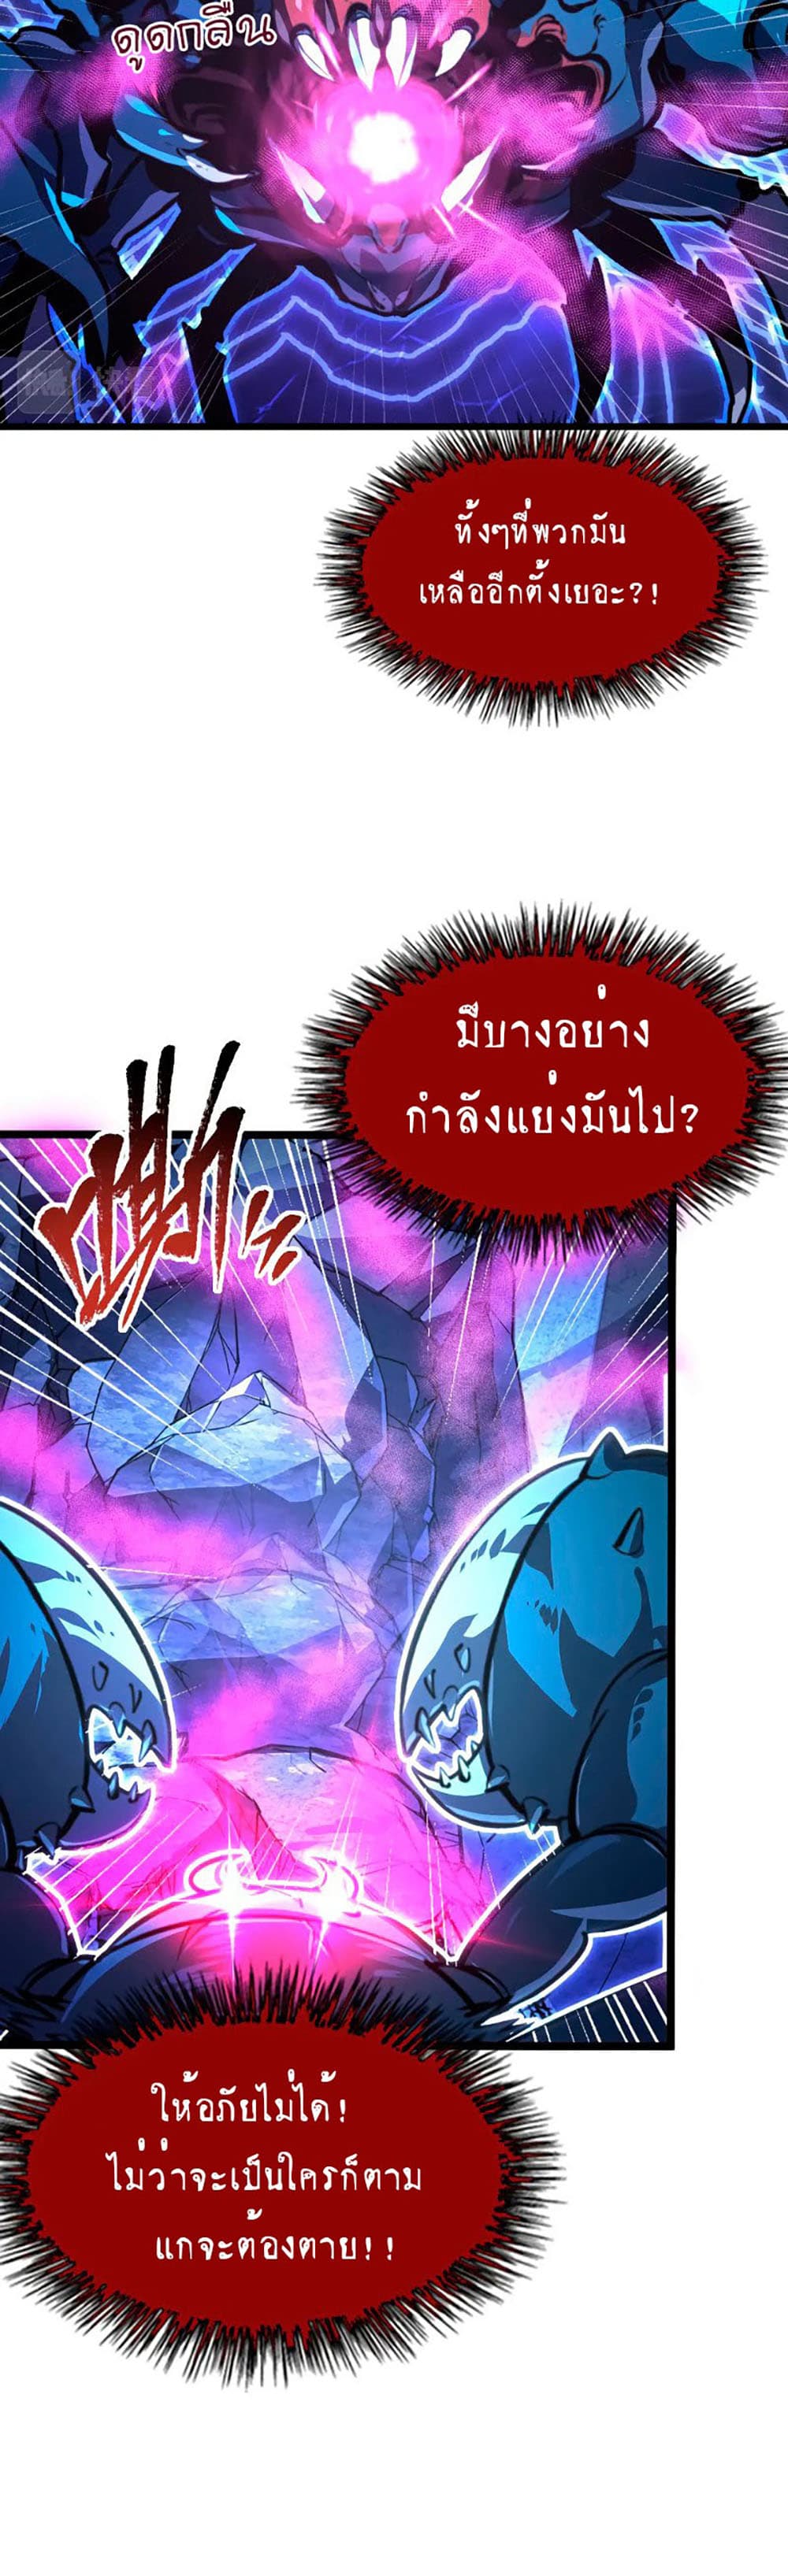 Rise From The Rubble เศษซากวันสิ้นโลก 110-110